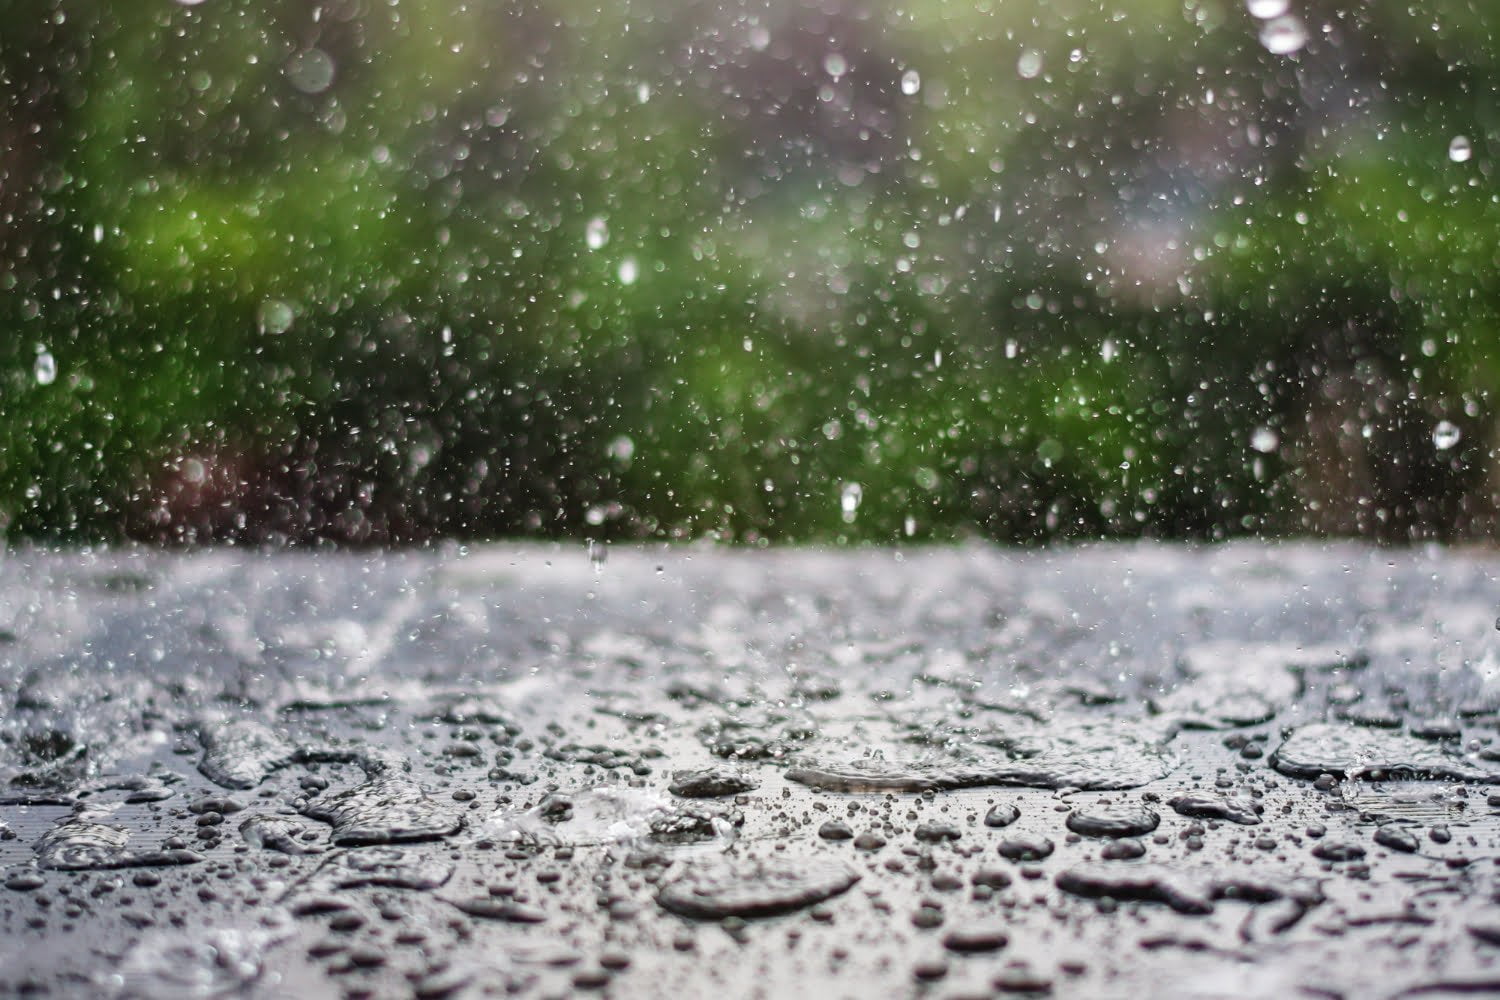 Why is the sound of rain so comforting?